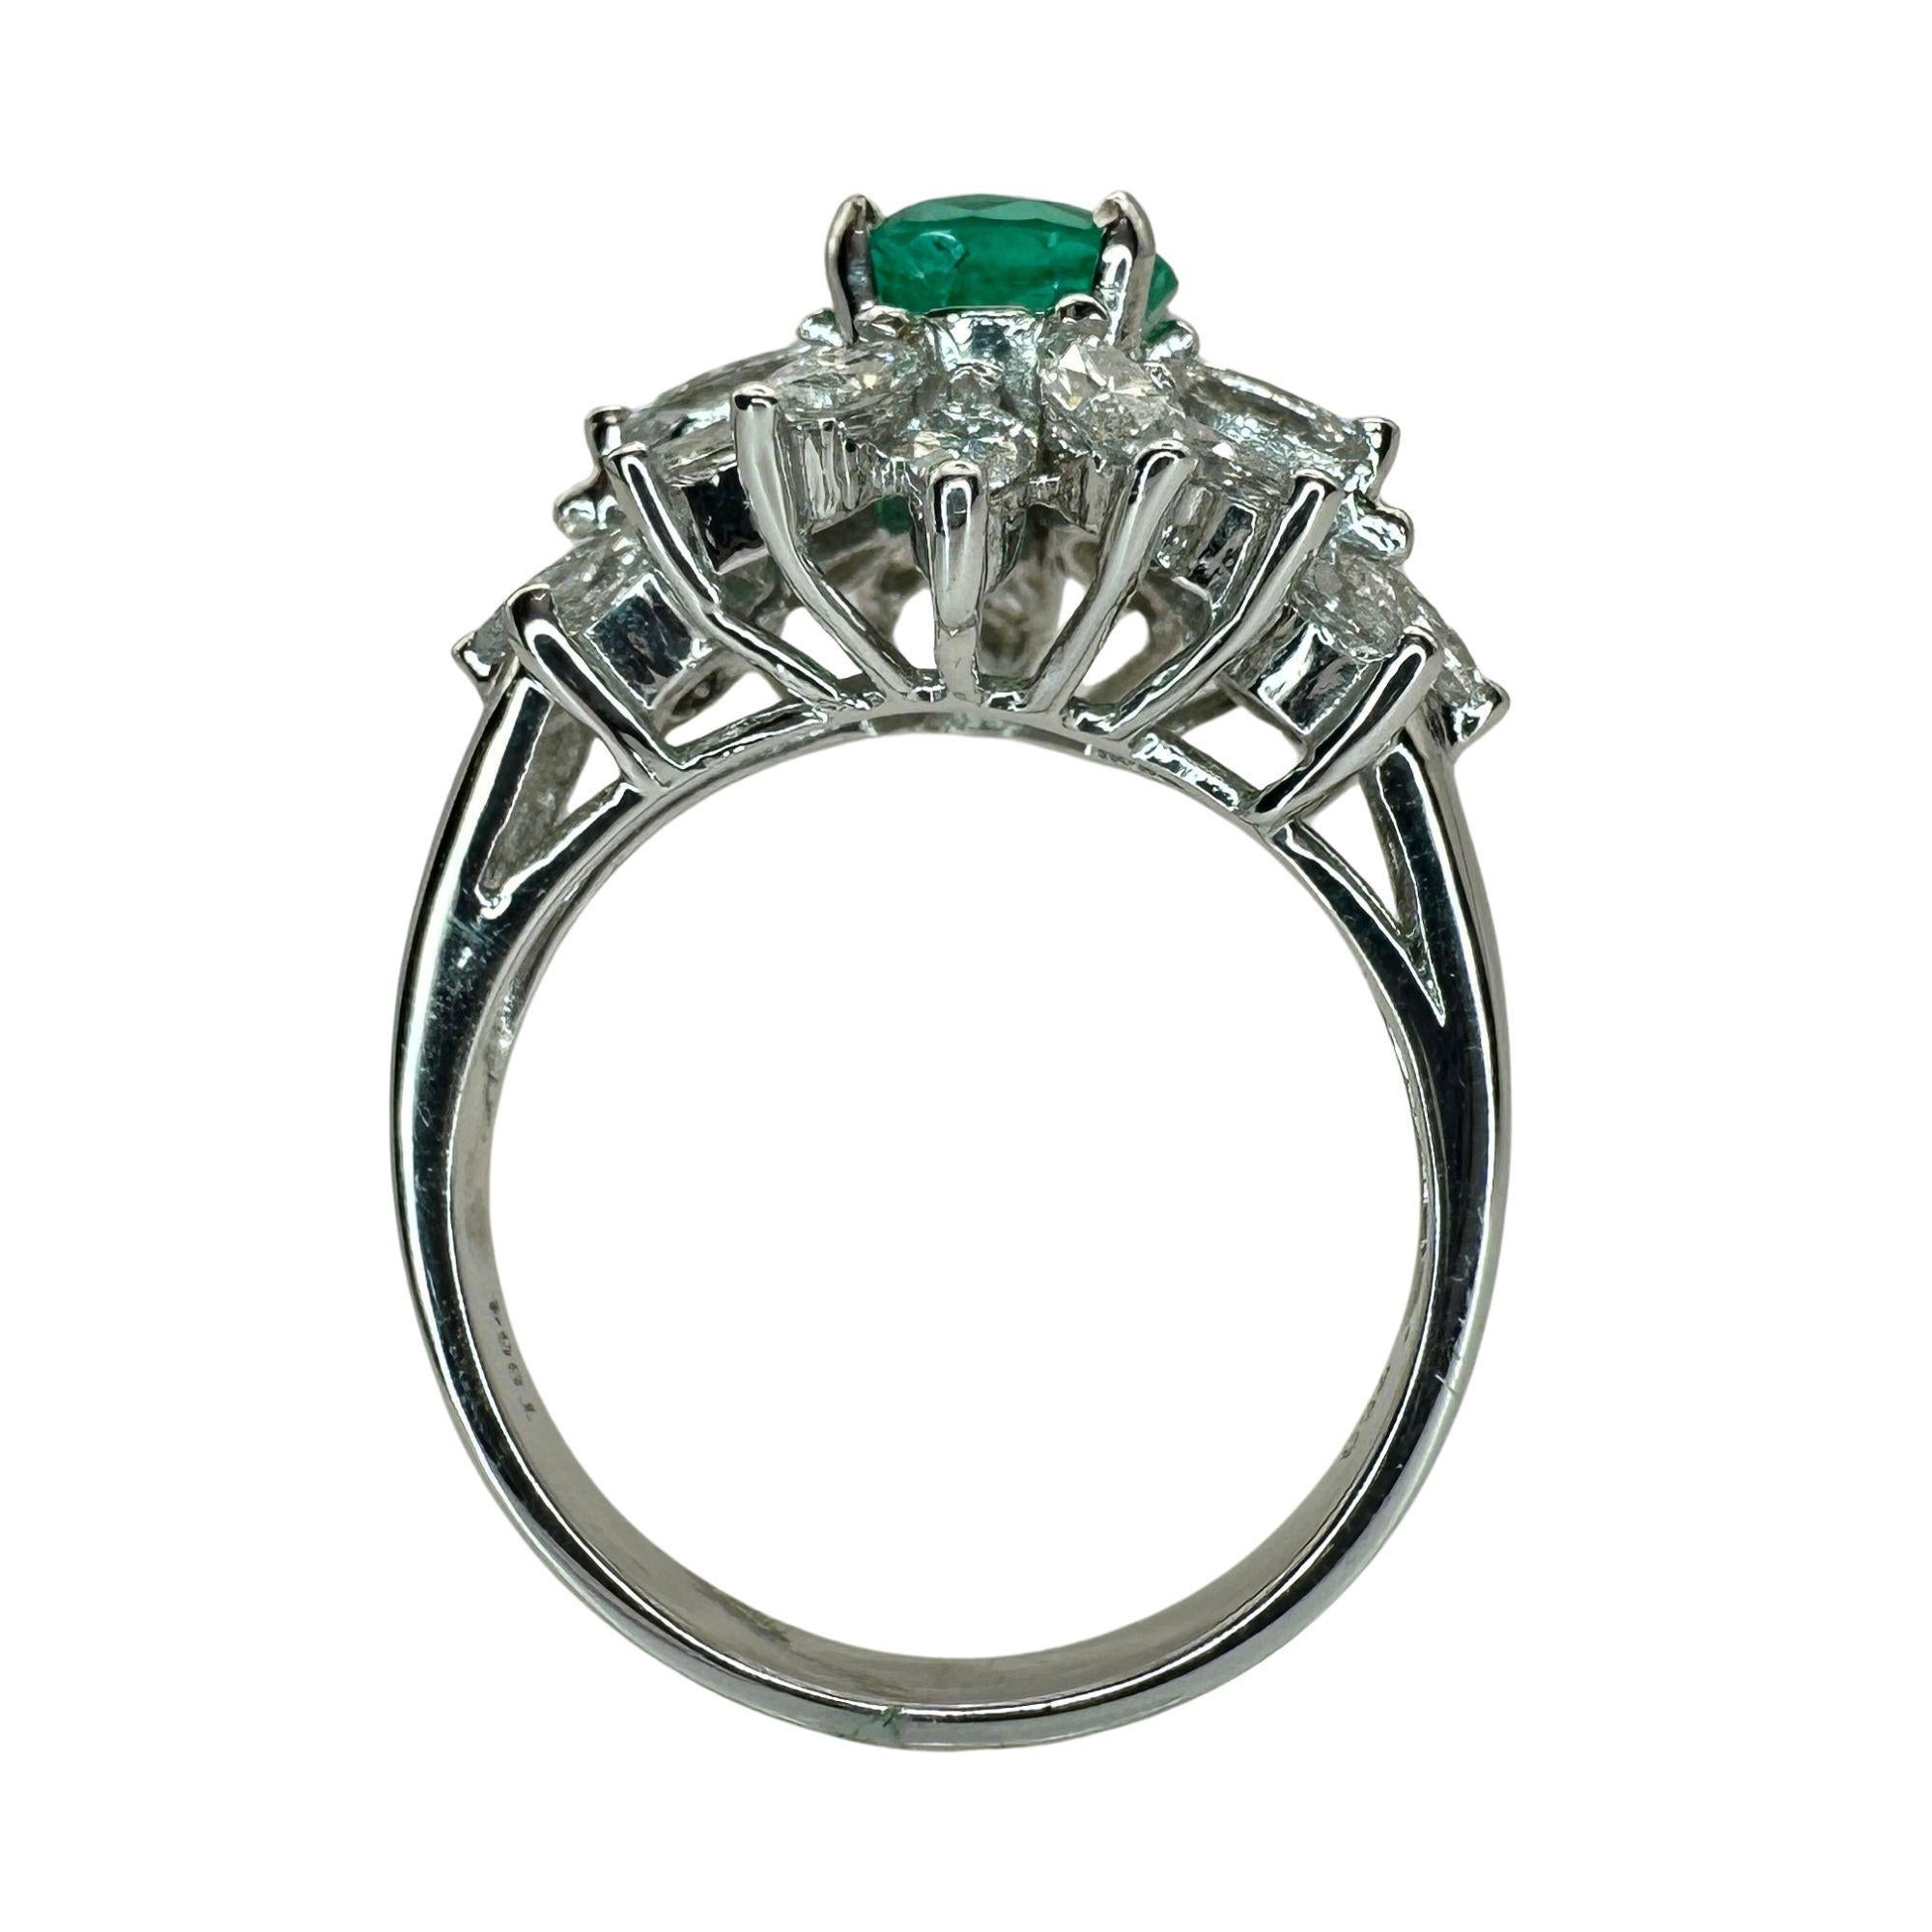 Indulge in our 18k Diamond and Emerald Ring. Crafted from white gold, this stunning piece features 1.75 carats of diamonds and a beautiful 1.08 carat emerald. With a ring size of 6.50 and a weight of 6.14 grams, this ring is a true indulgence for